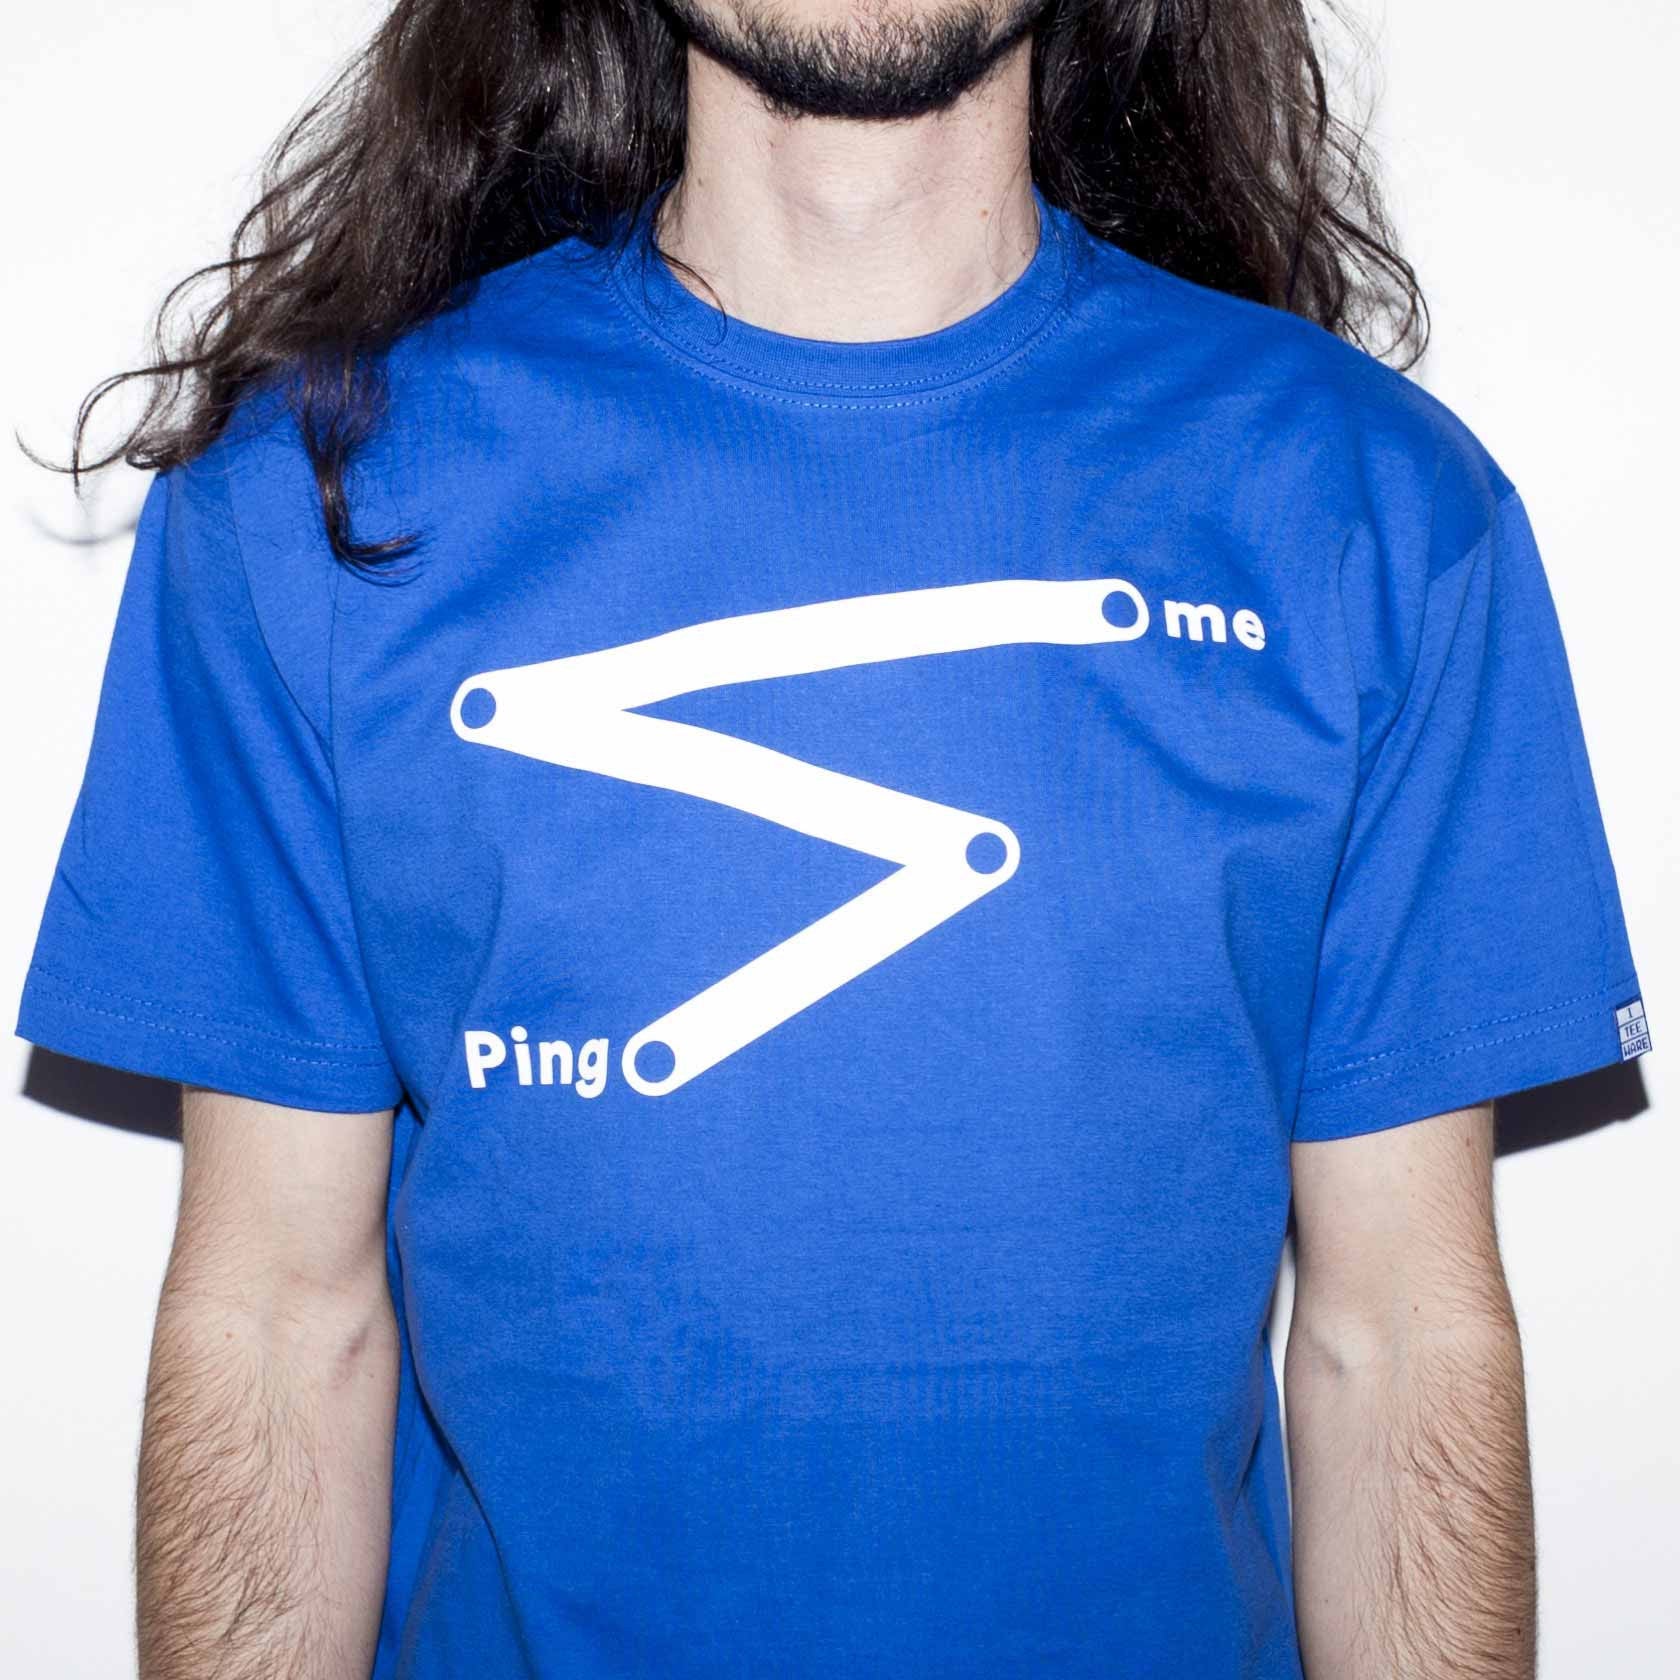 Royal blue T-shirt with funny computer nerd network geek joke about pinging someone screen printed in white on the front. A saw tooth line with Ping and Me at either end.